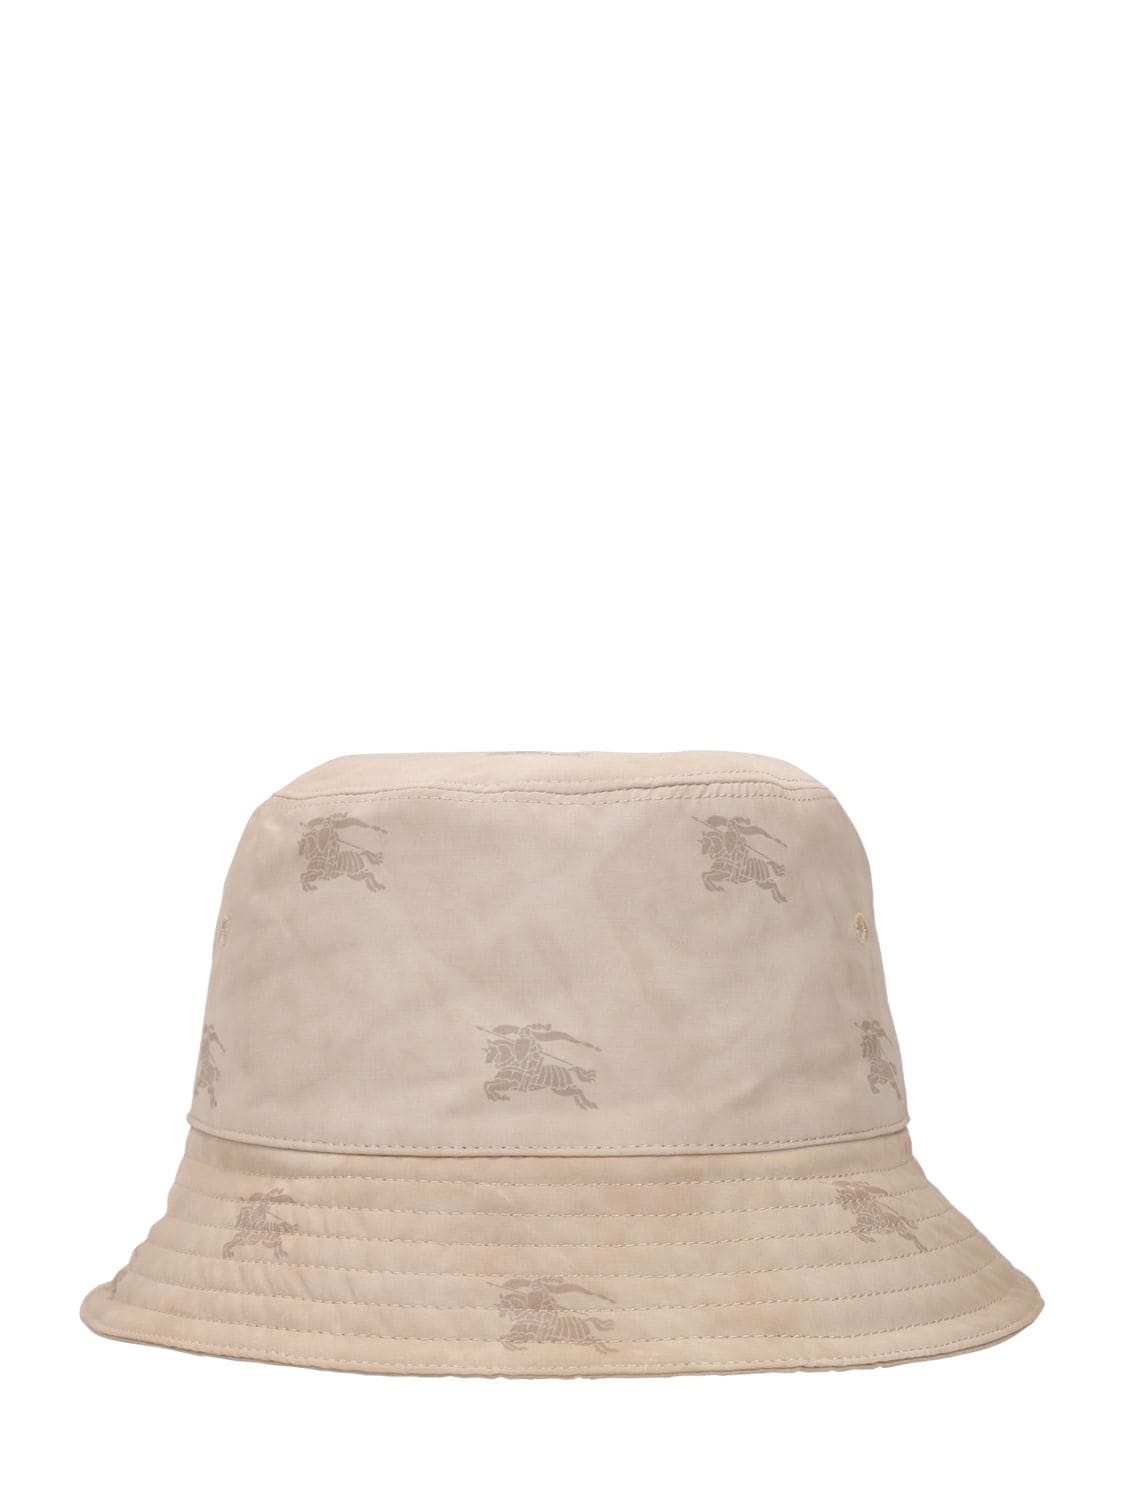 Image of Knight Printed Cotton Blend Bucket Hat